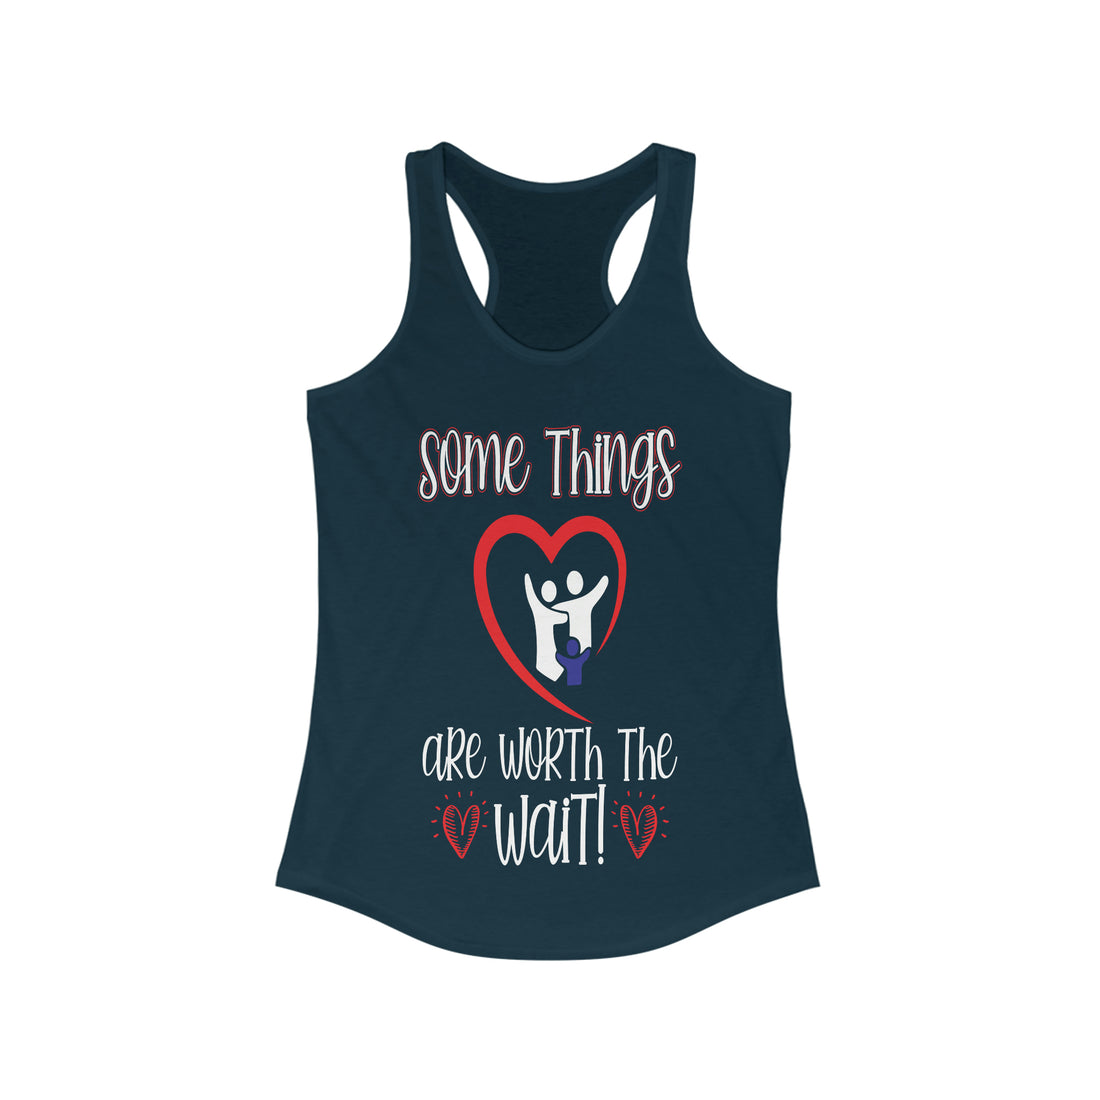 Some Things Are Worth The Wait - Racerback Tank